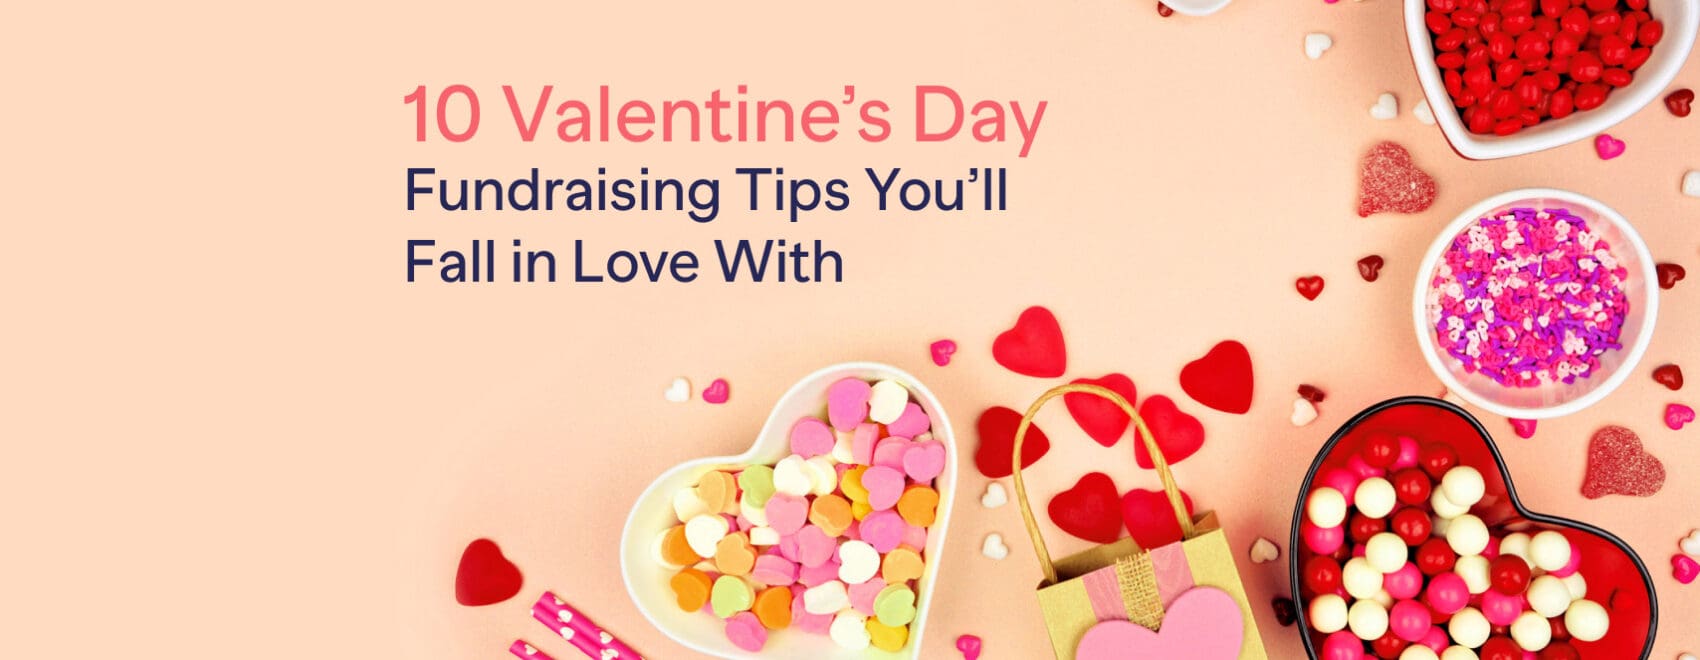 10 Valentines Day Fundraising Tips